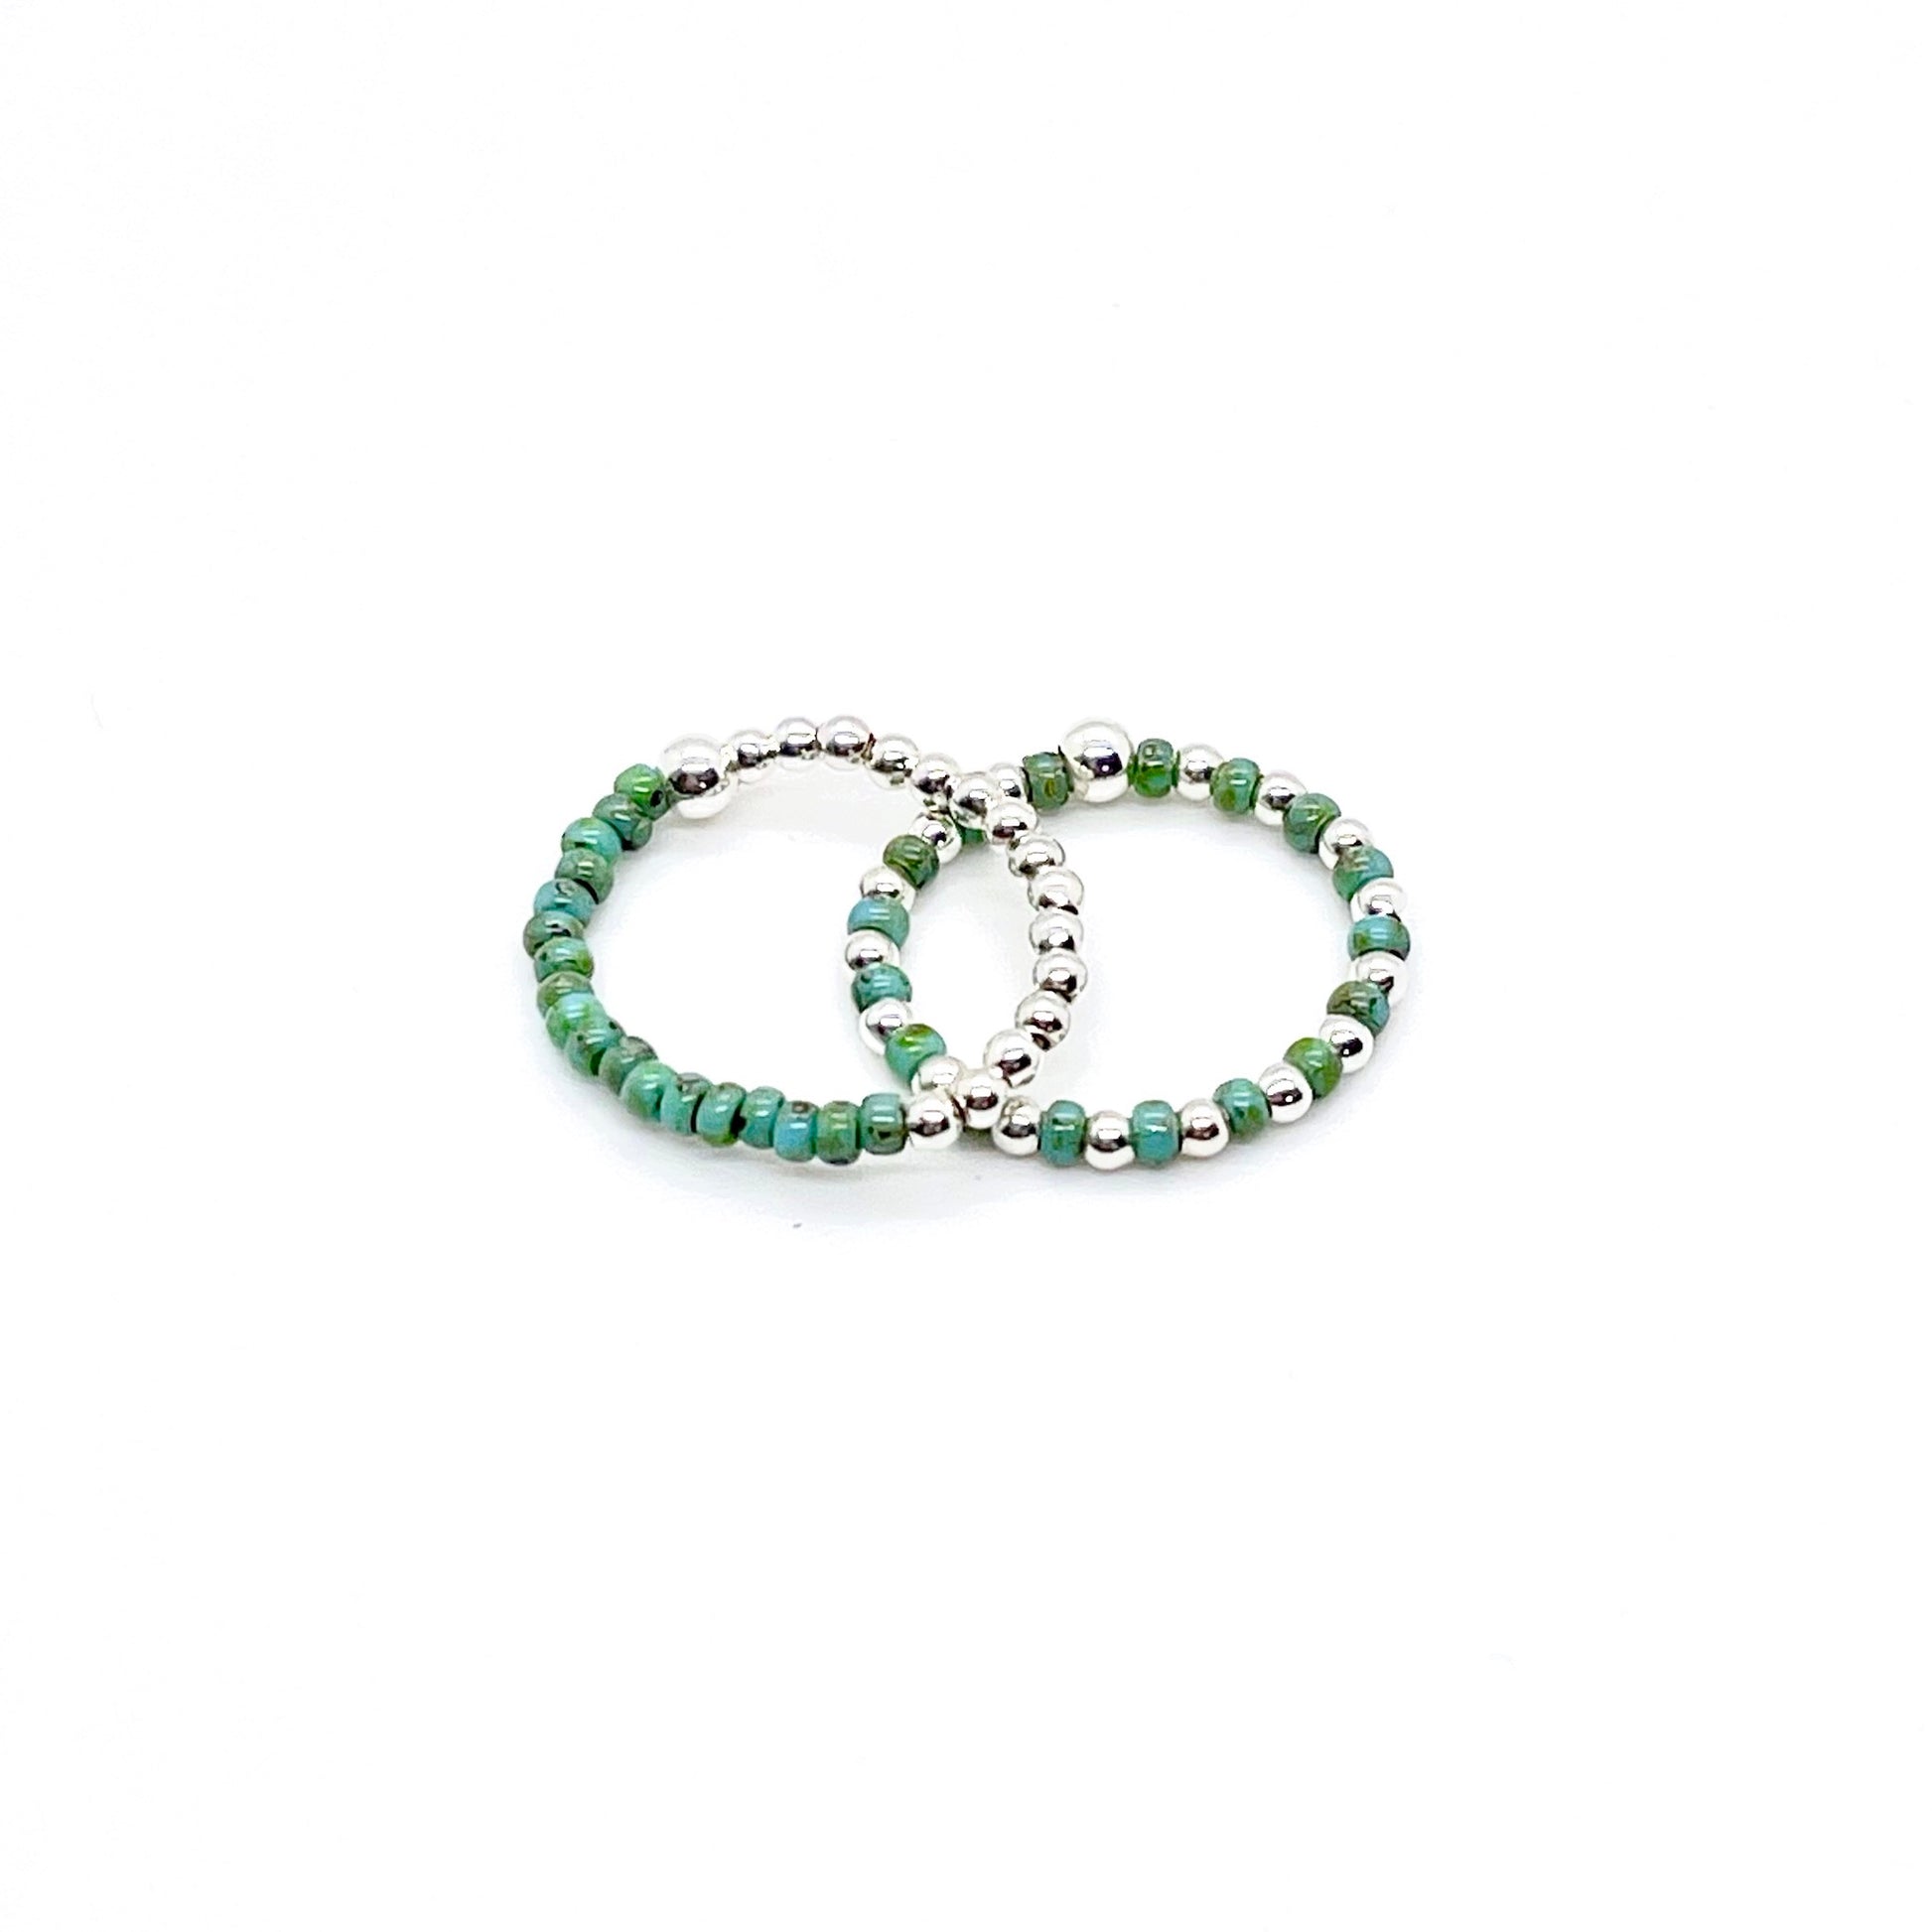 Stretch ring set with turquoise color block and seed beads alternating with 2mm sterling silver balls on stretch cord.